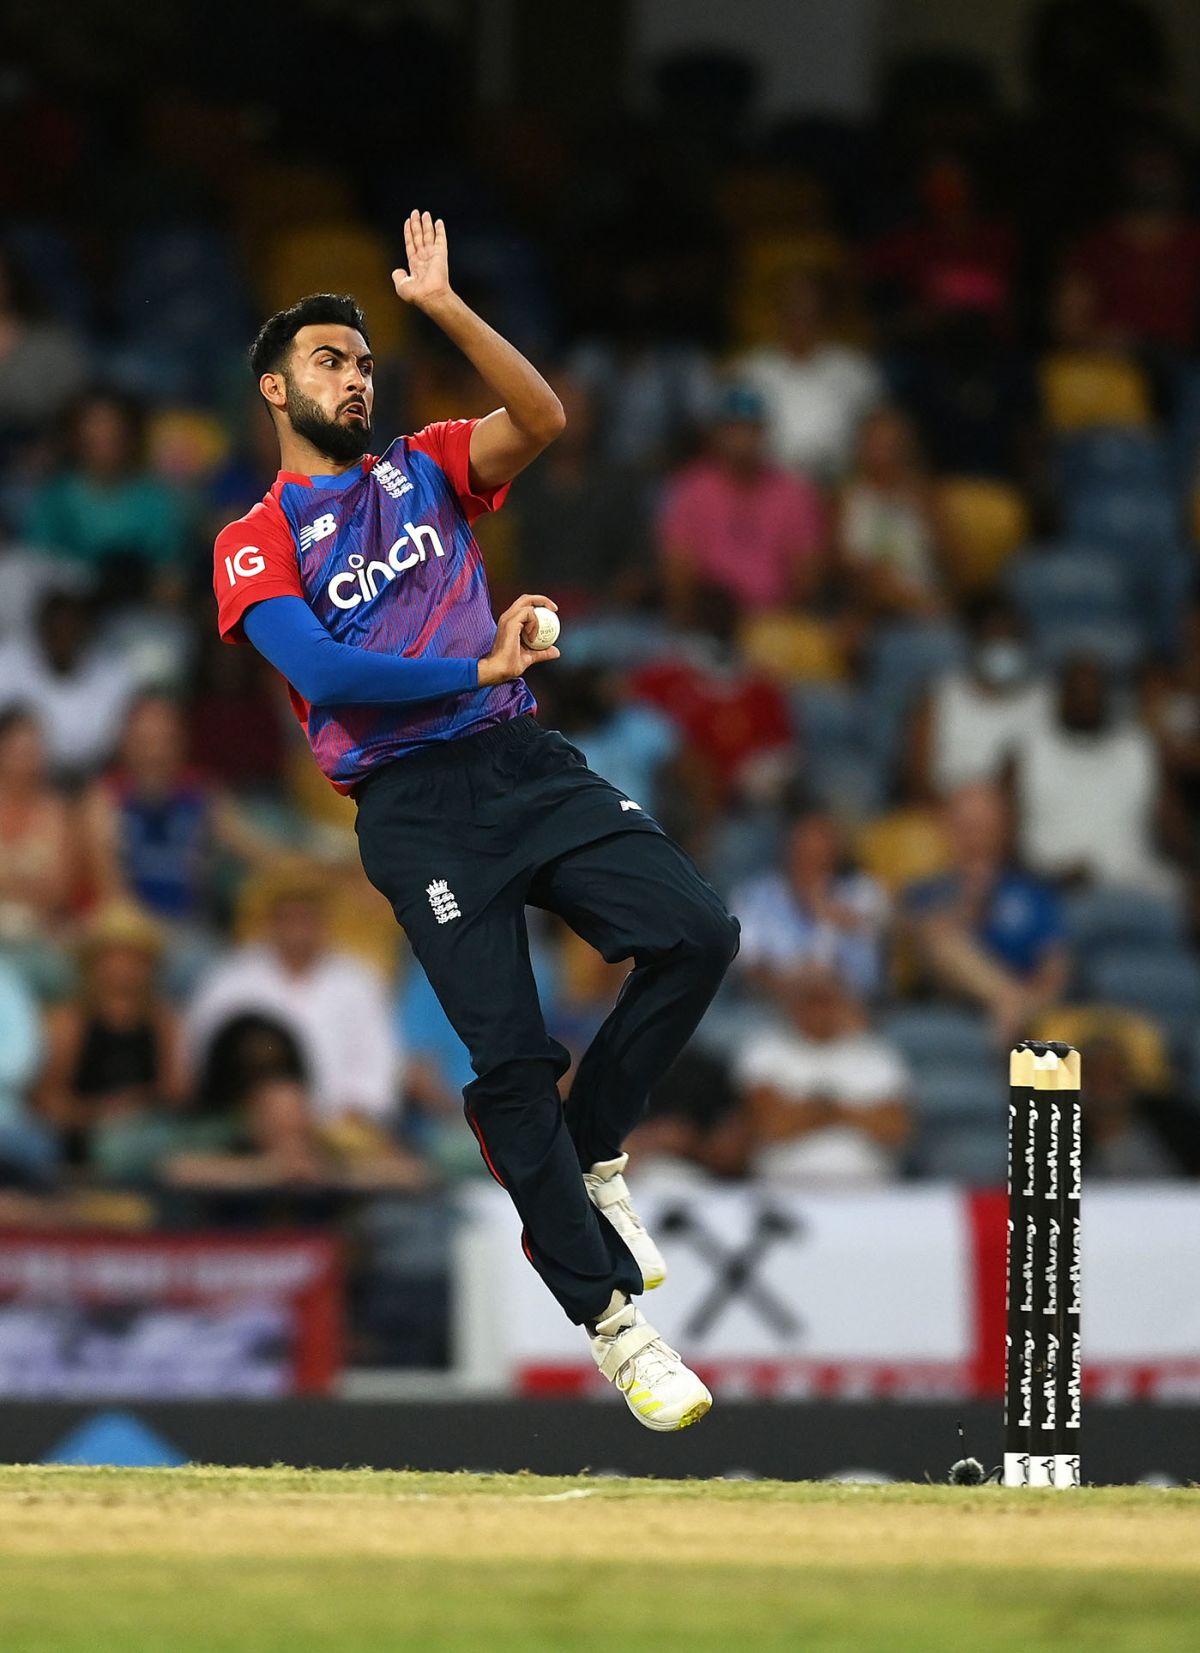 It was a rough night with the ball for Saqib Mahmood, West Indies vs England, 2nd T20I, Kensington Oval, Barbados, January 23, 2022